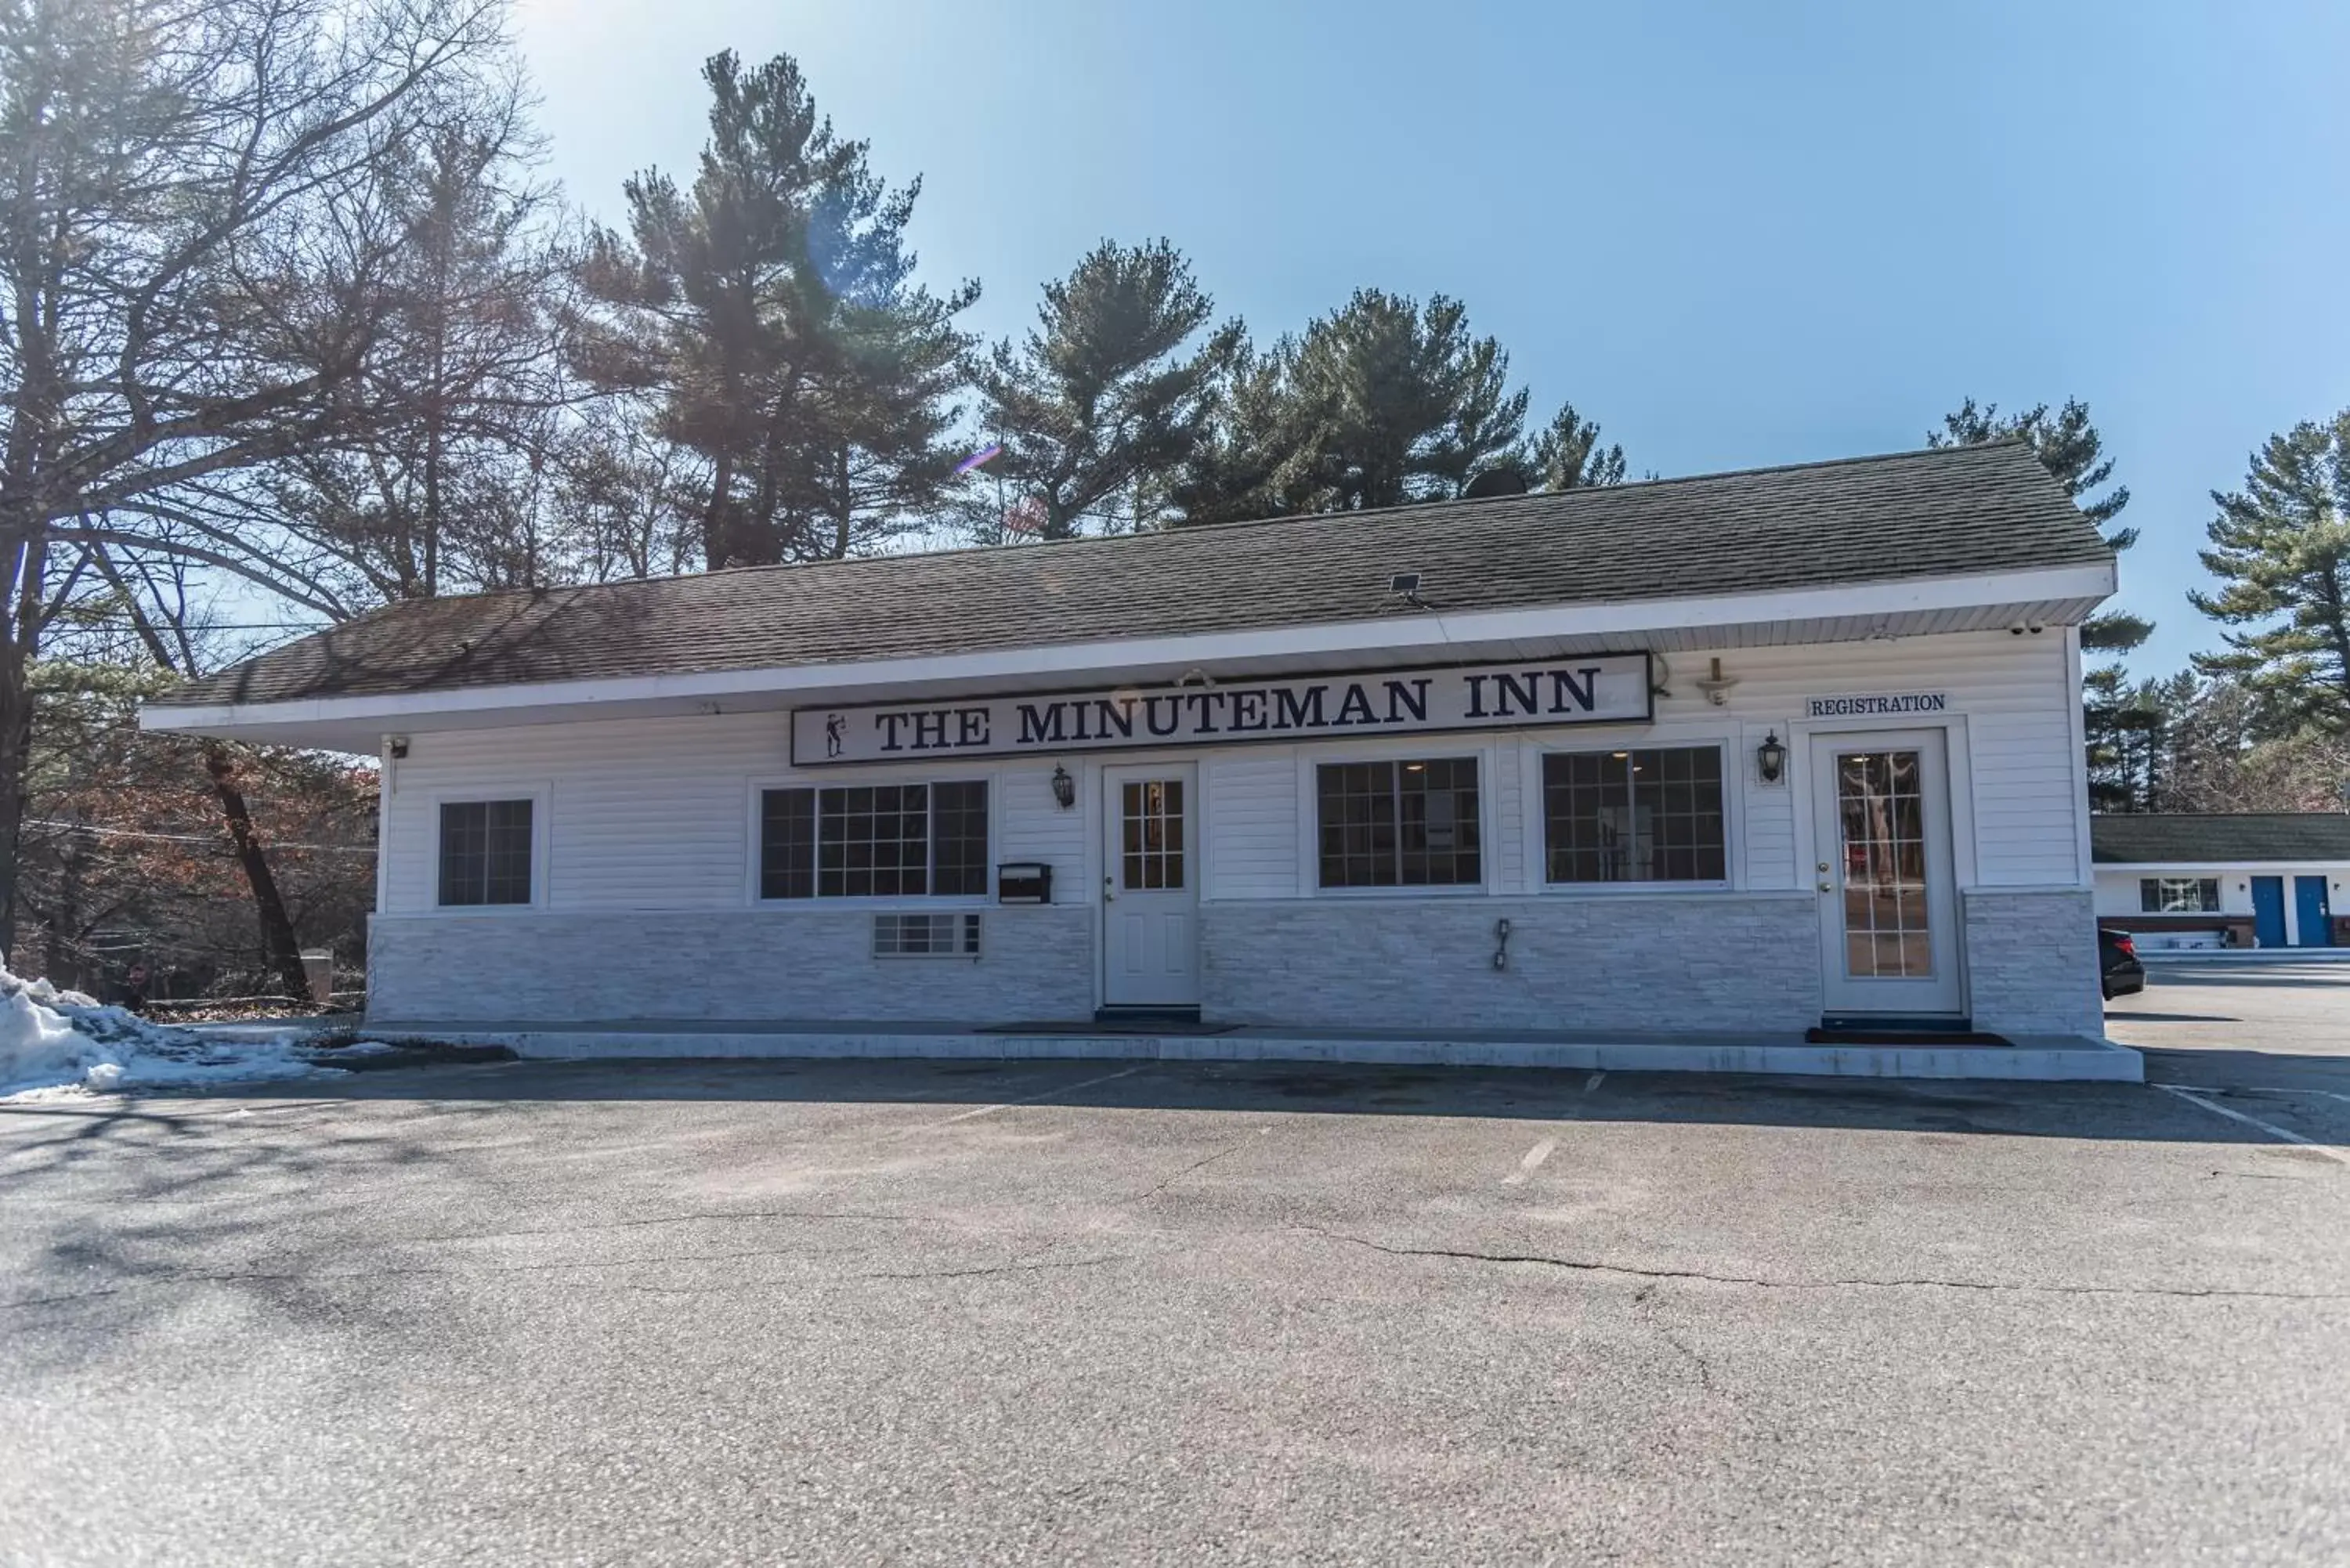 Property Building in The Minuteman Inn Acton Concord Littleton